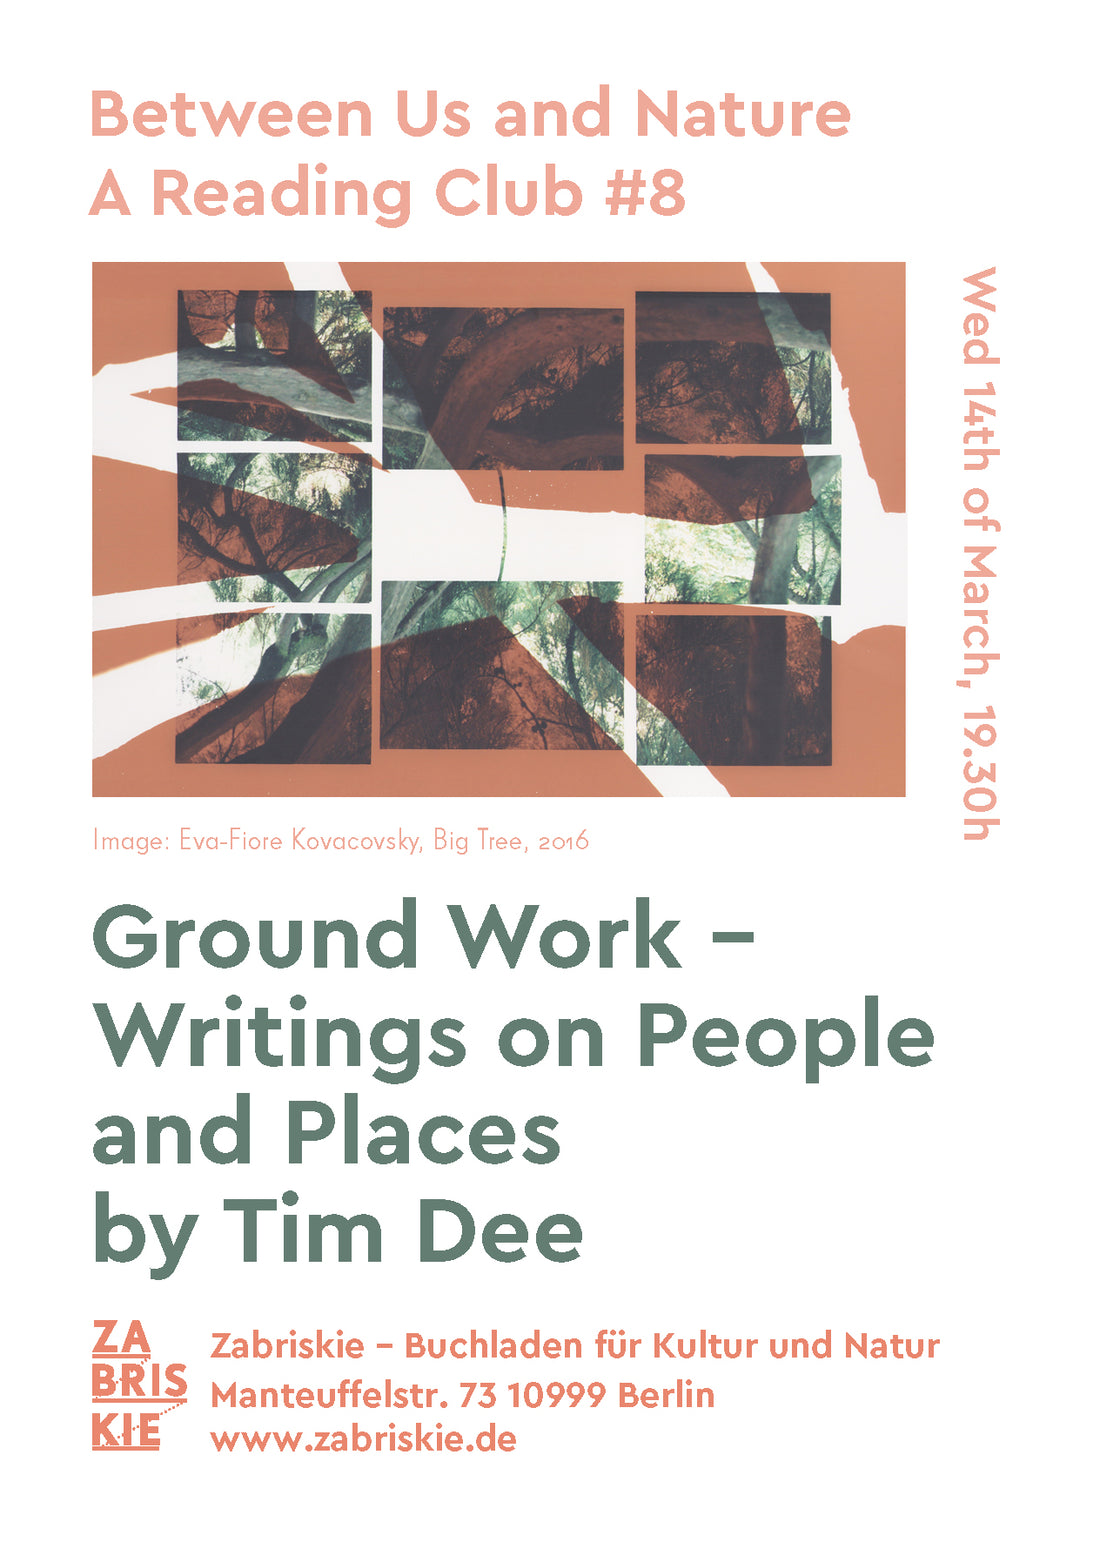 Between Us and Nature – A Reading Club #8: Ground Work - Writings on People and Places by Tim Dee